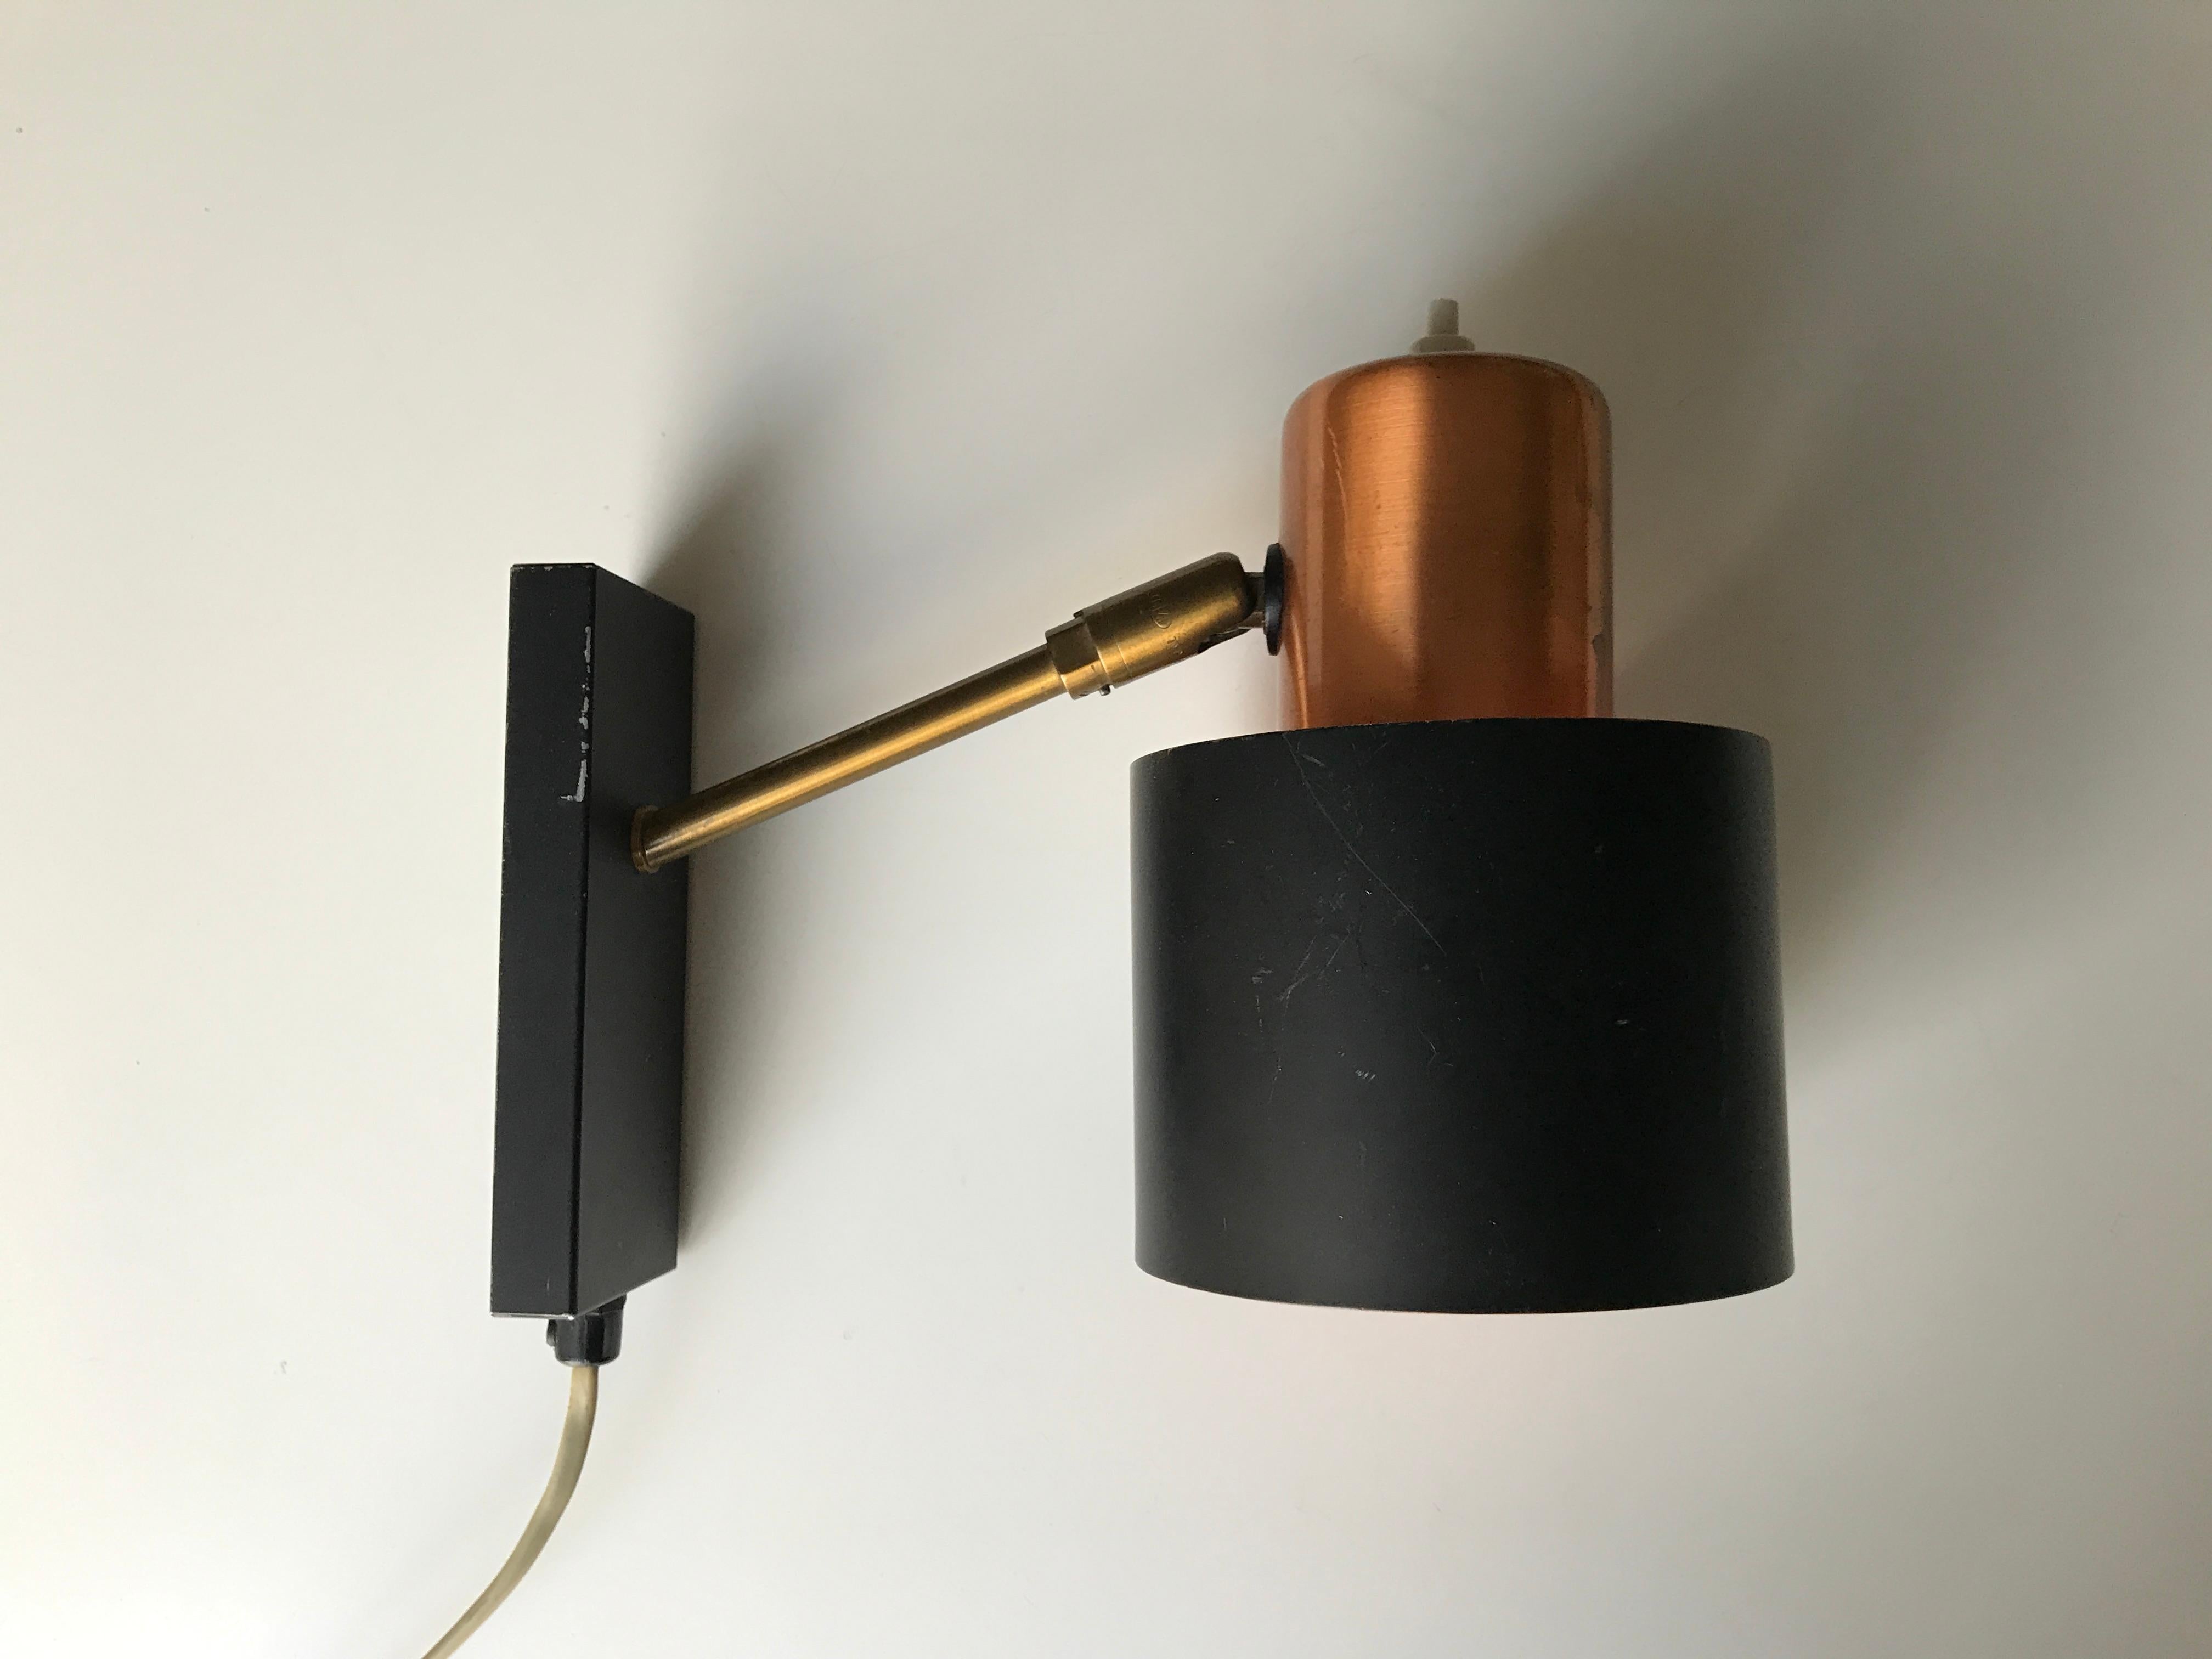 Midcentury Danish design wall light design by Jo Hammerborg. Copper and black matte surface. Typically orange surface inside shade. Manufactured by late Danish factory Lyfa. E14 bulb socket holder. Original condition. New cable can be fitted without